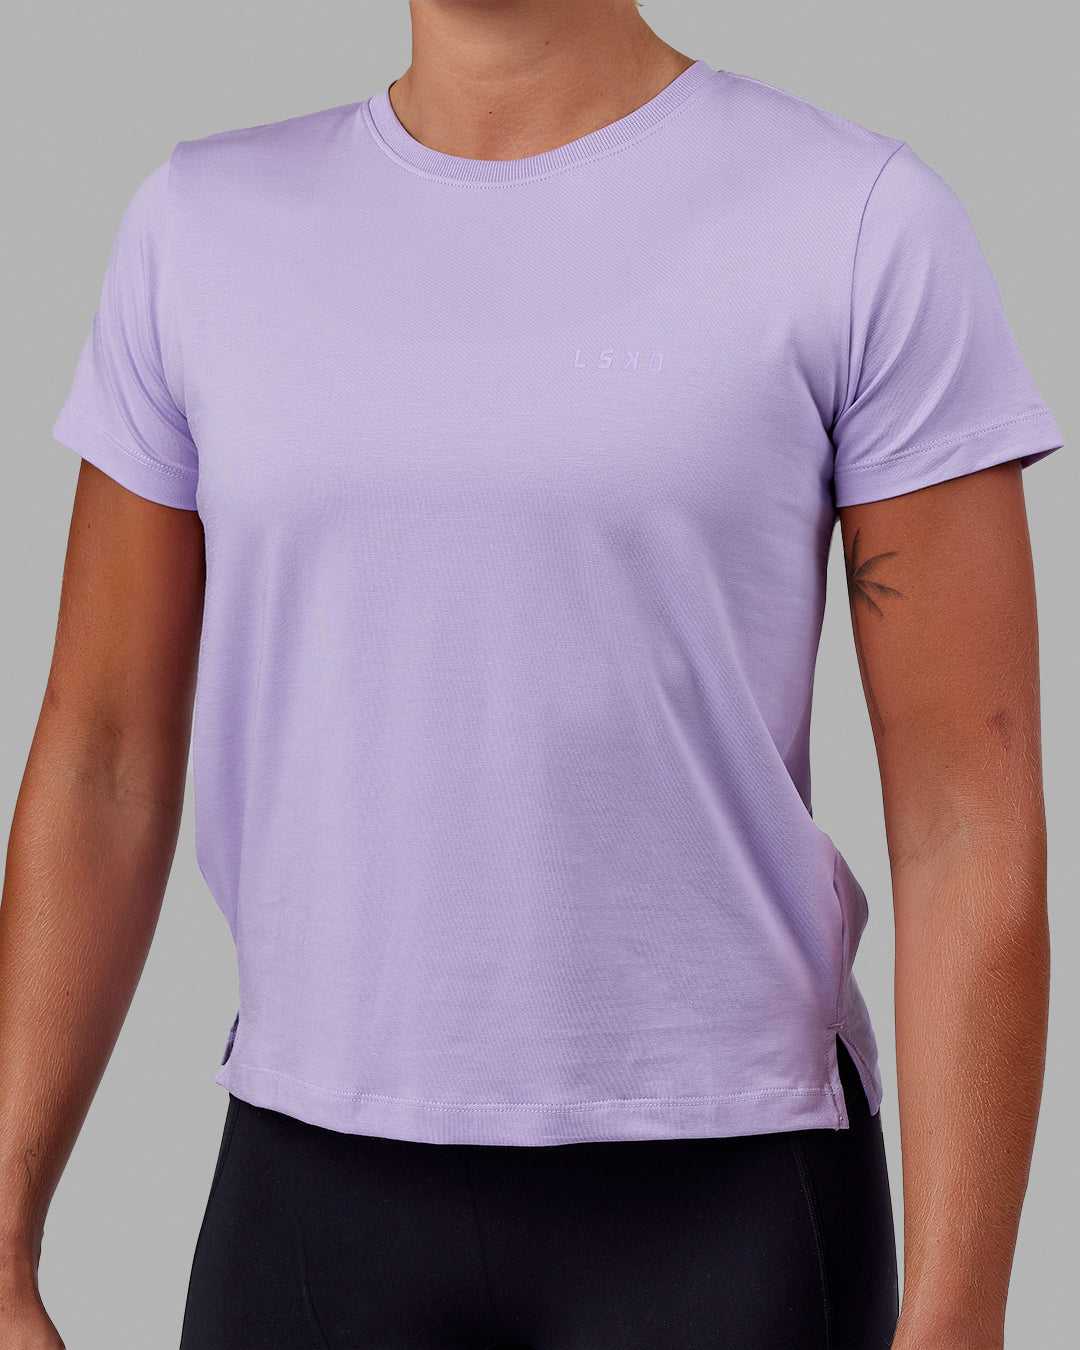 Deluxe PimaFLX Tee - Pale Lilac